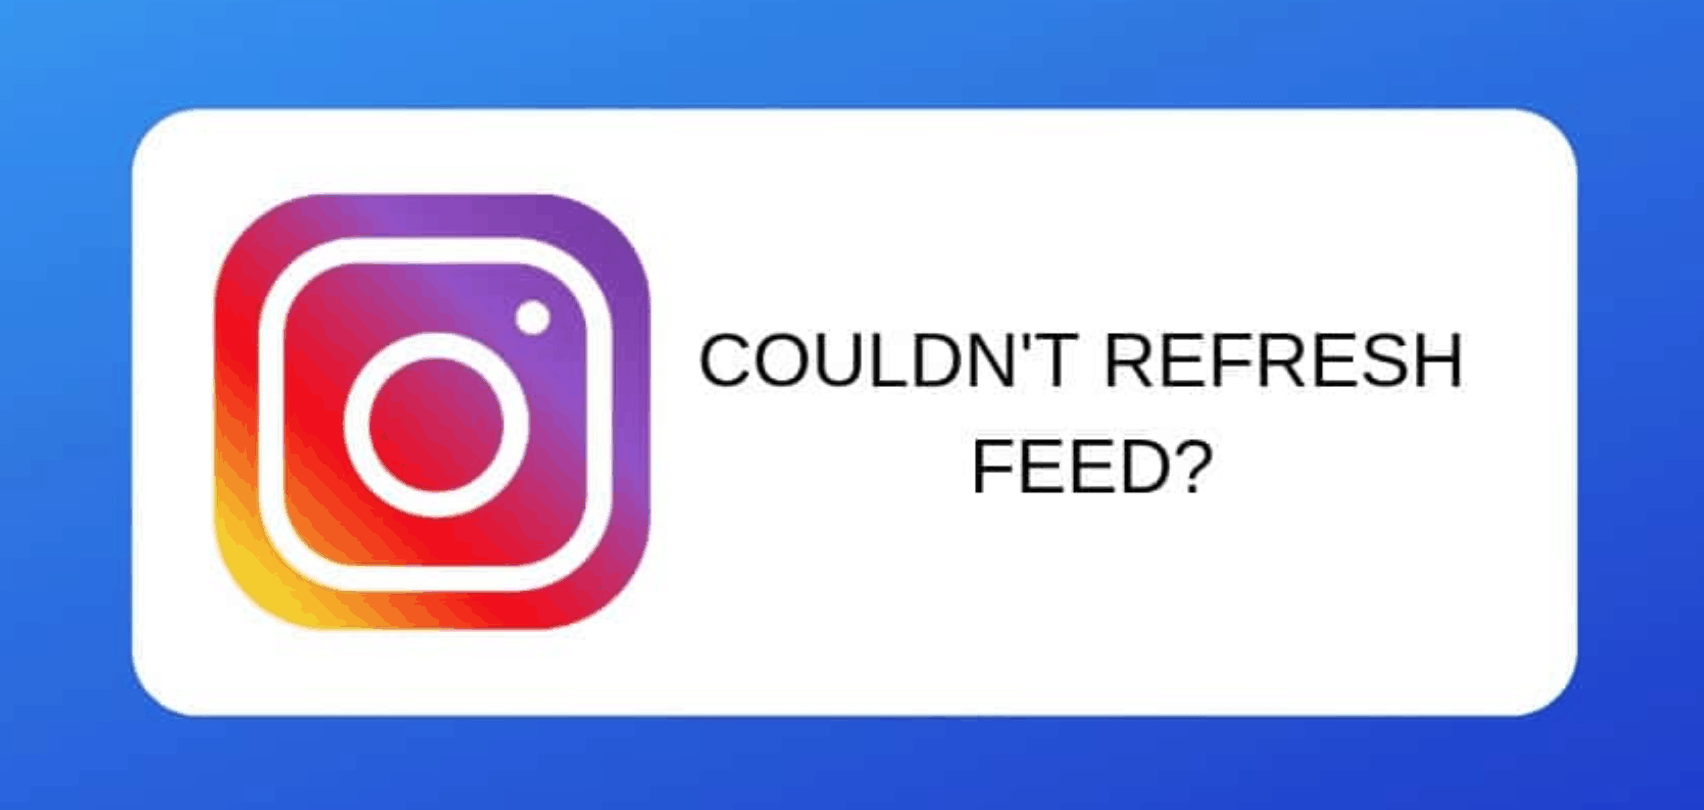 Instagram users cant refresh feed